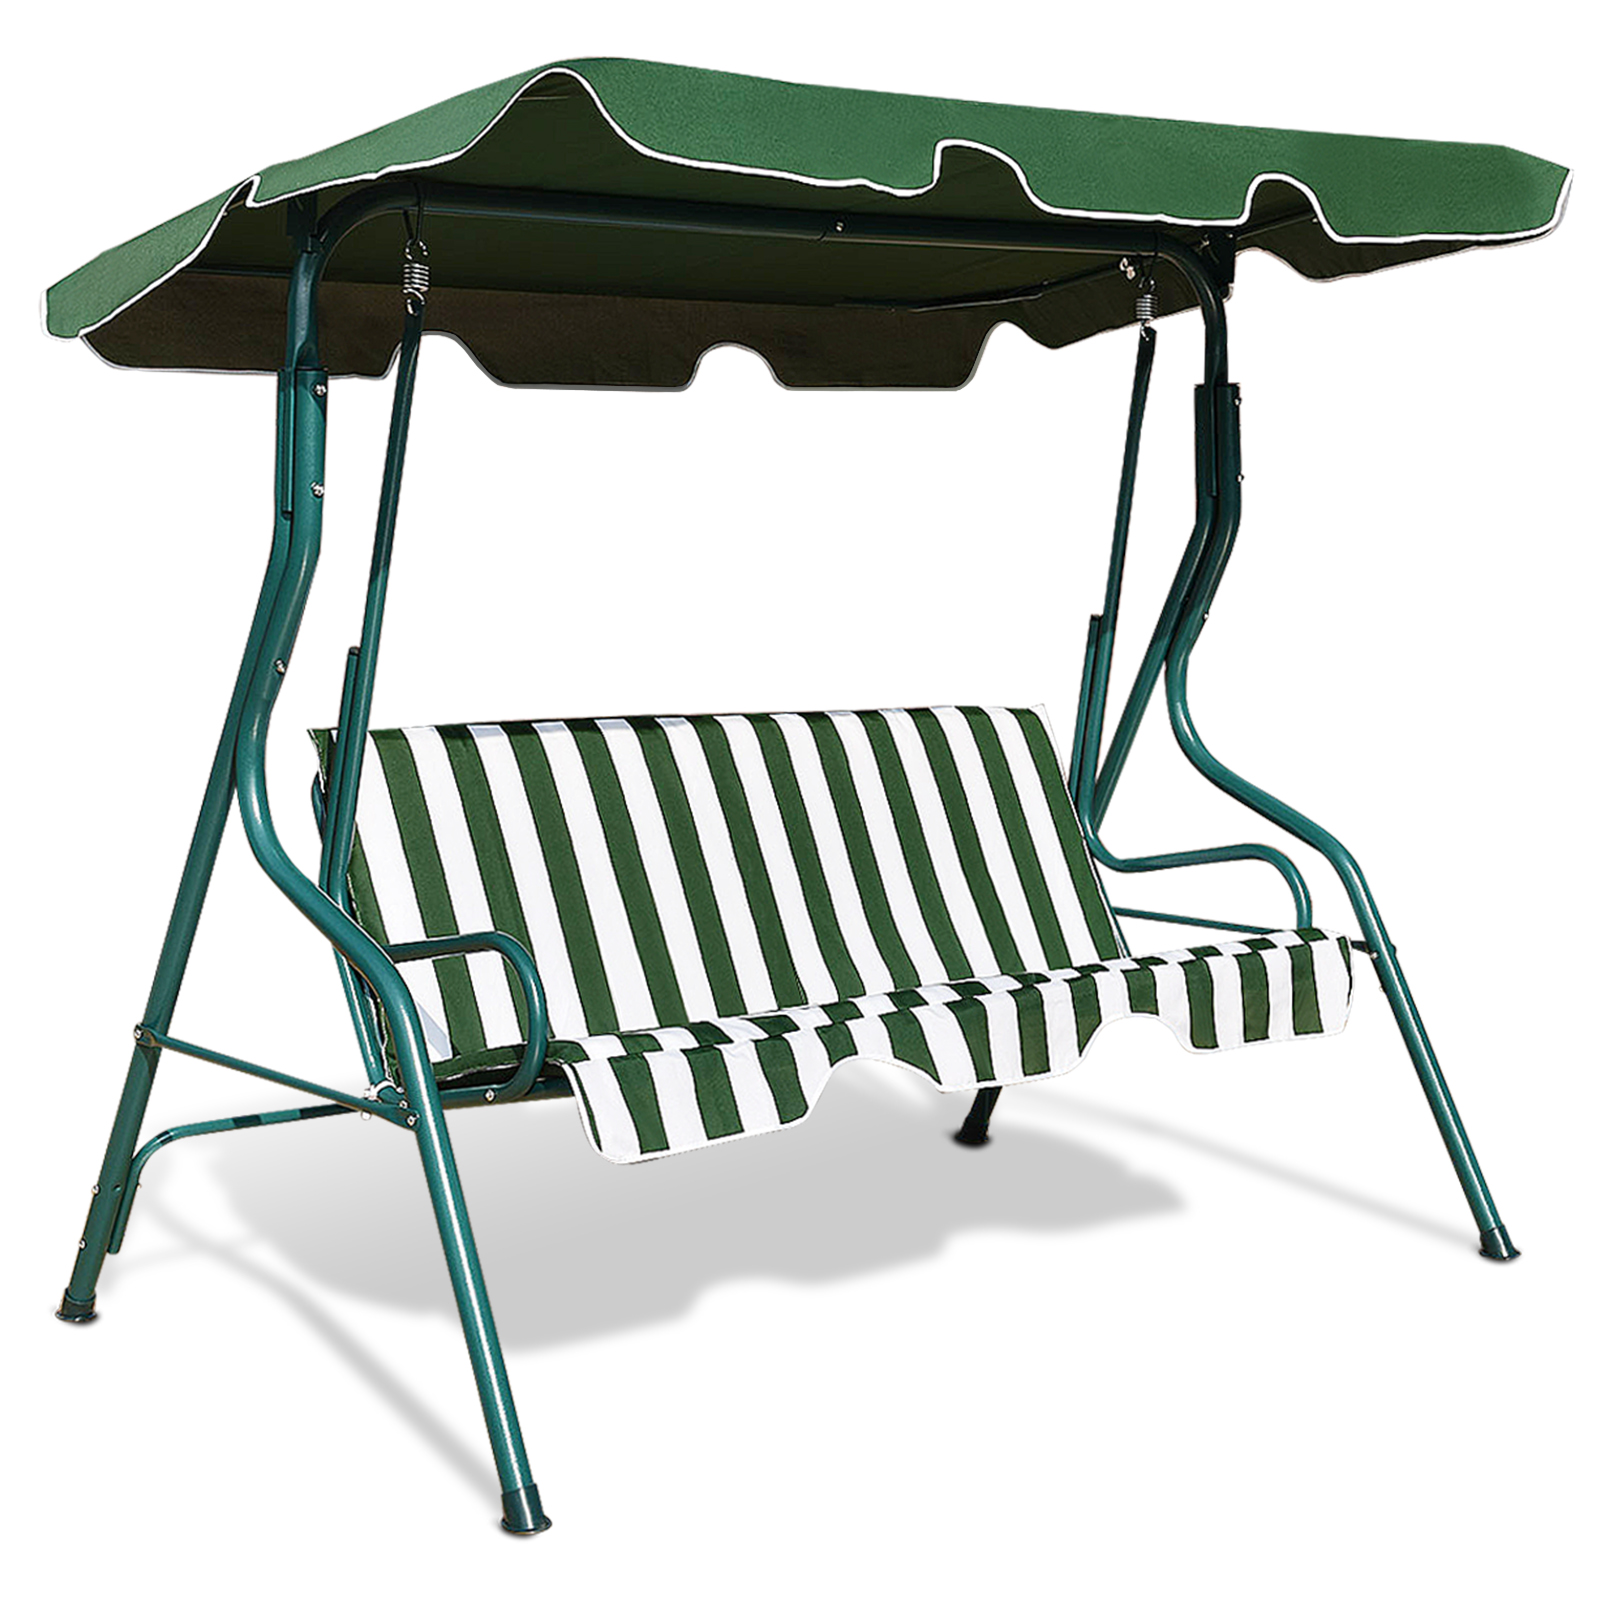 Patiojoy 3-Seats Outdoor Glider Hammock with Adjustable Waterproof Canopy Aluminum Frame Patio Swing Chair Green - image 1 of 10